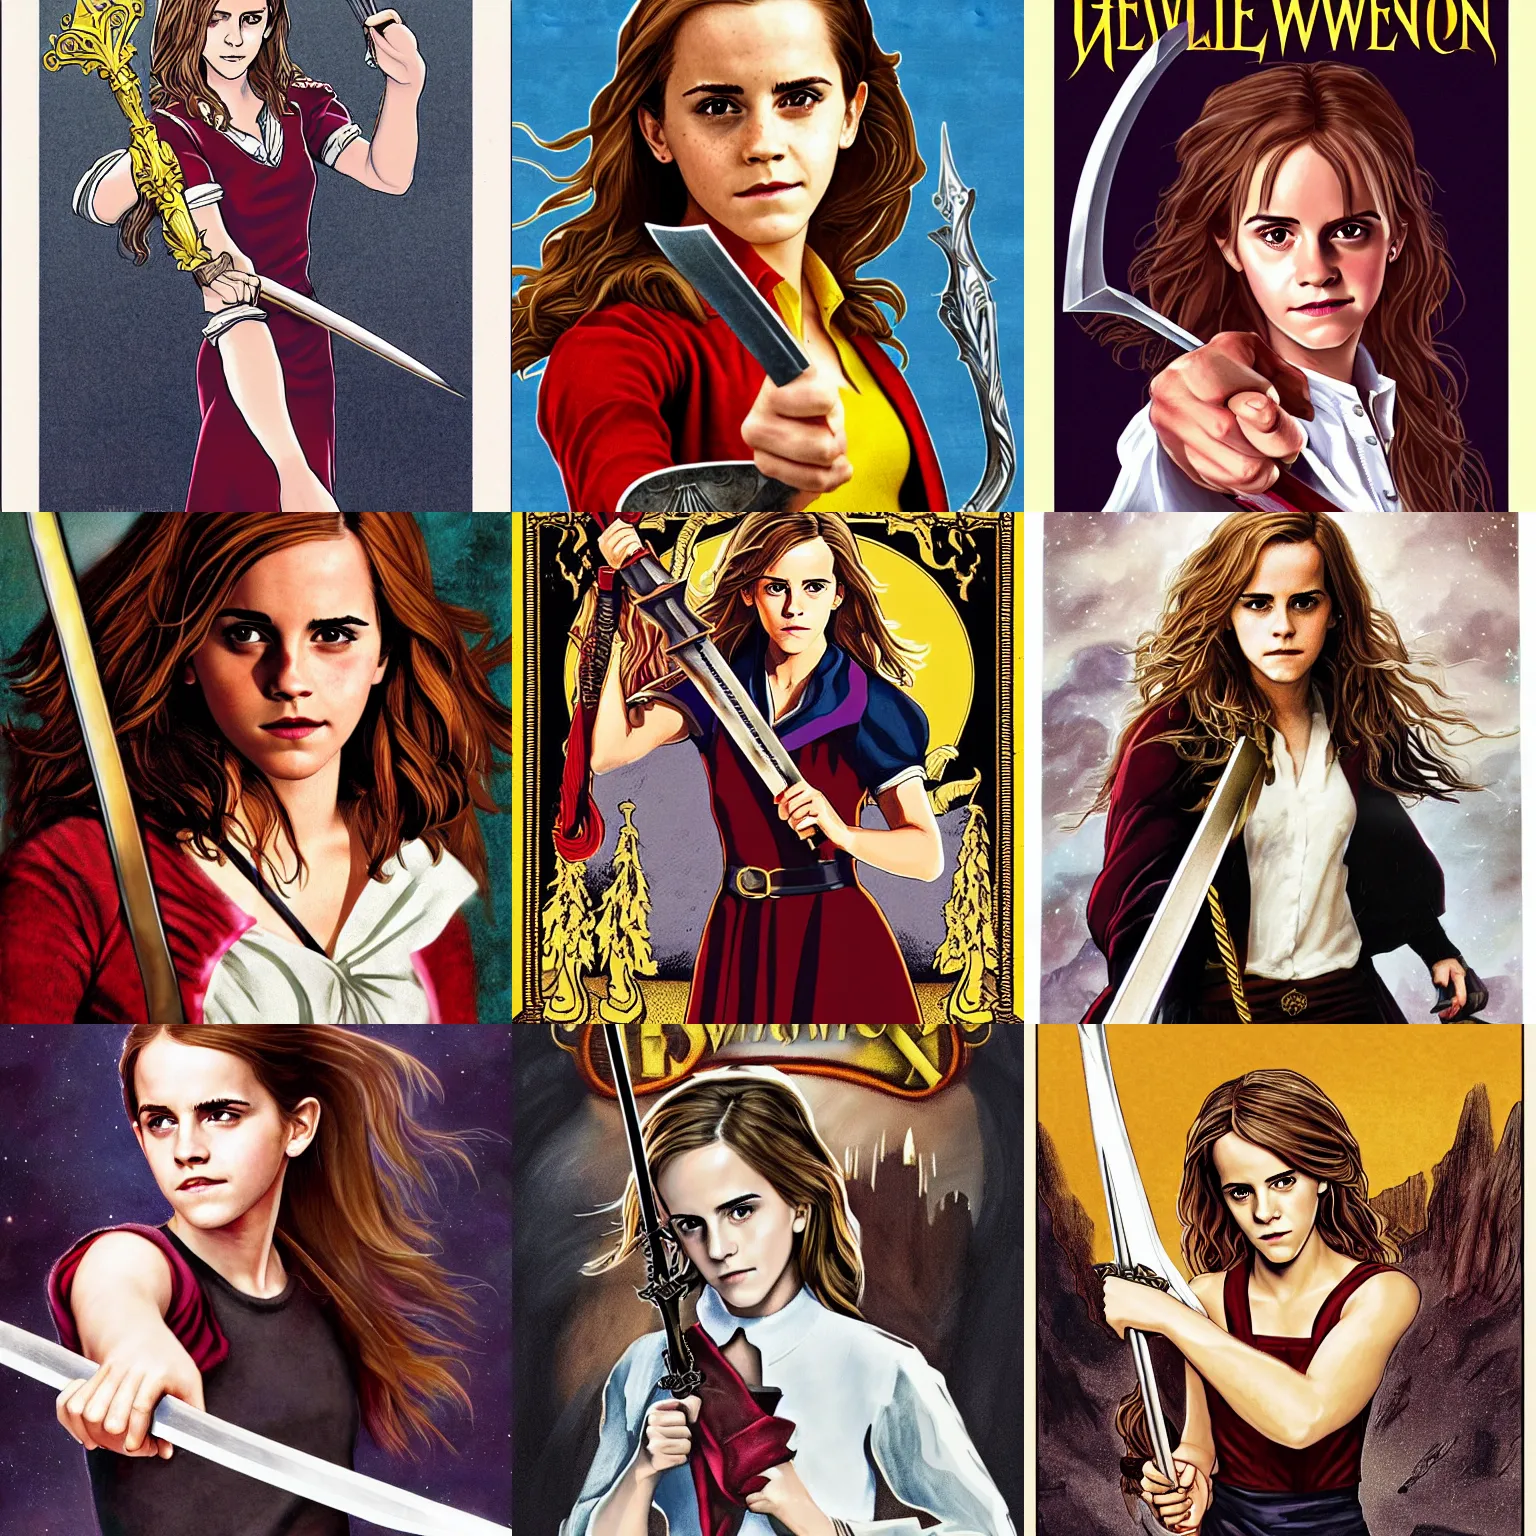 Prompt: emma watson / hermione granger holding the sword of gryffindor, cover art illustration by mary grandpre, for a book by jk rowling